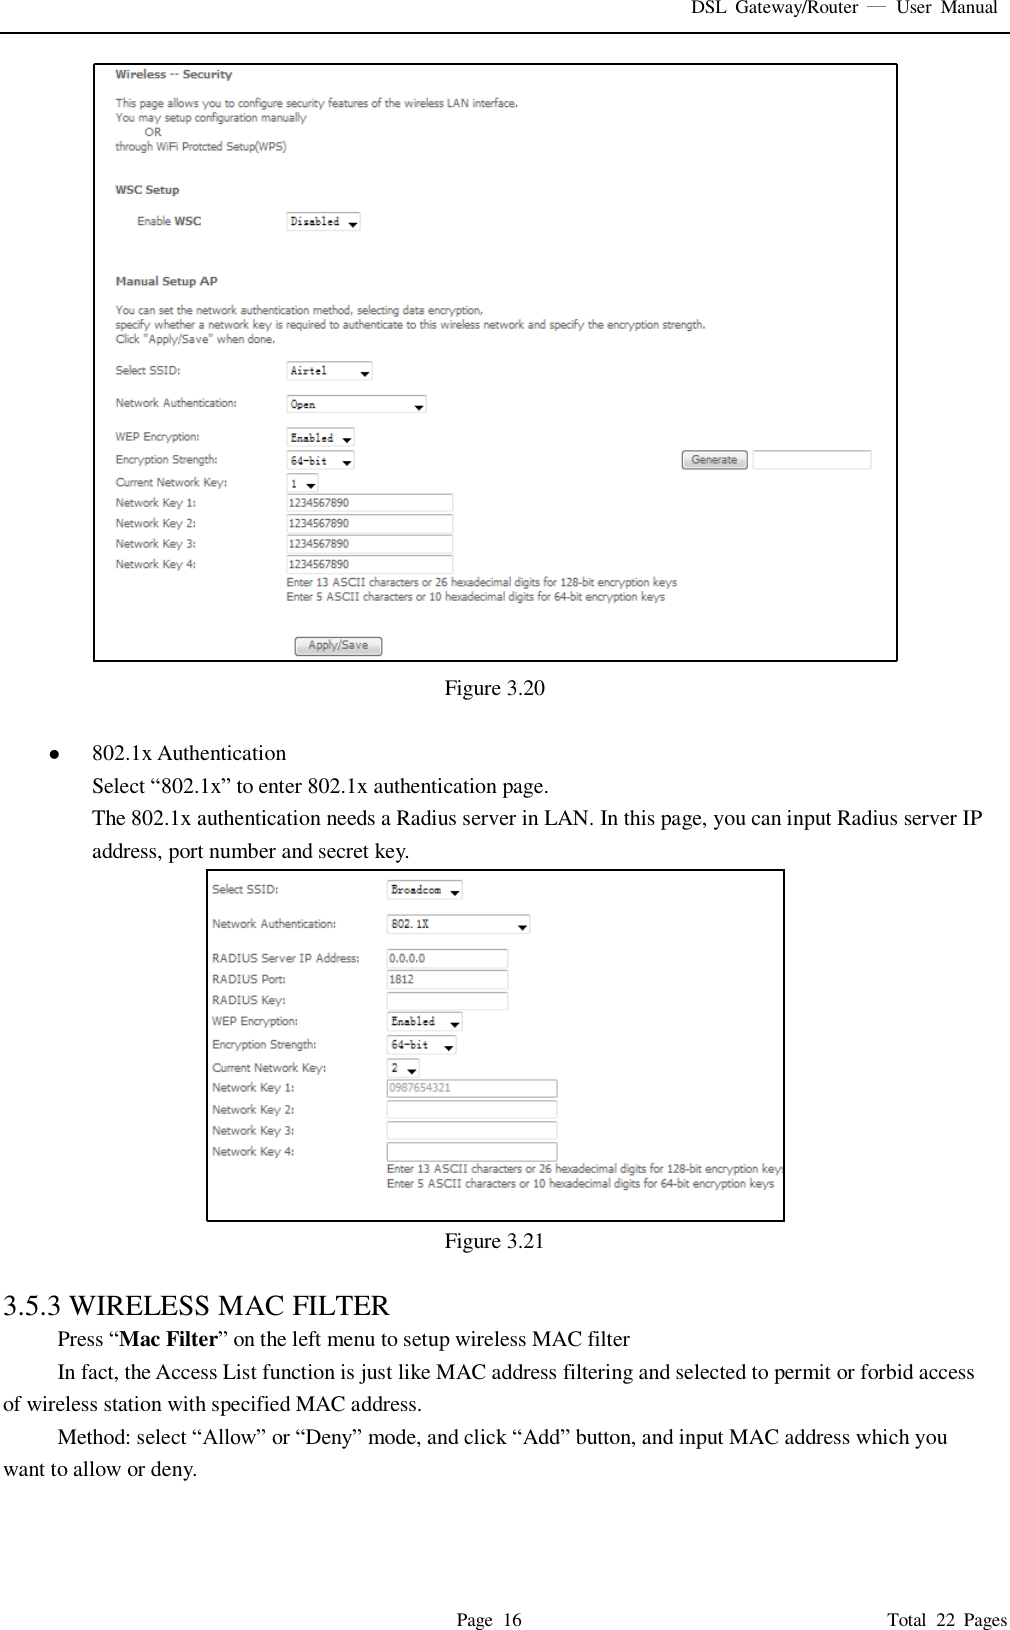 DSL  Gateway/Router    User  Manual   Page  16                                                                              Total  22  Pages  Figure 3.20     802.1x Authentication Select “802.1x” to enter 802.1x authentication page.   The 802.1x authentication needs a Radius server in LAN. In this page, you can input Radius server IP address, port number and secret key.  Figure 3.21  3.5.3 WIRELESS MAC FILTER Press “Mac Filter” on the left menu to setup wireless MAC filter In fact, the Access List function is just like MAC address filtering and selected to permit or forbid access of wireless station with specified MAC address. Method: select “Allow” or “Deny” mode, and click “Add” button, and input MAC address which you want to allow or deny.   